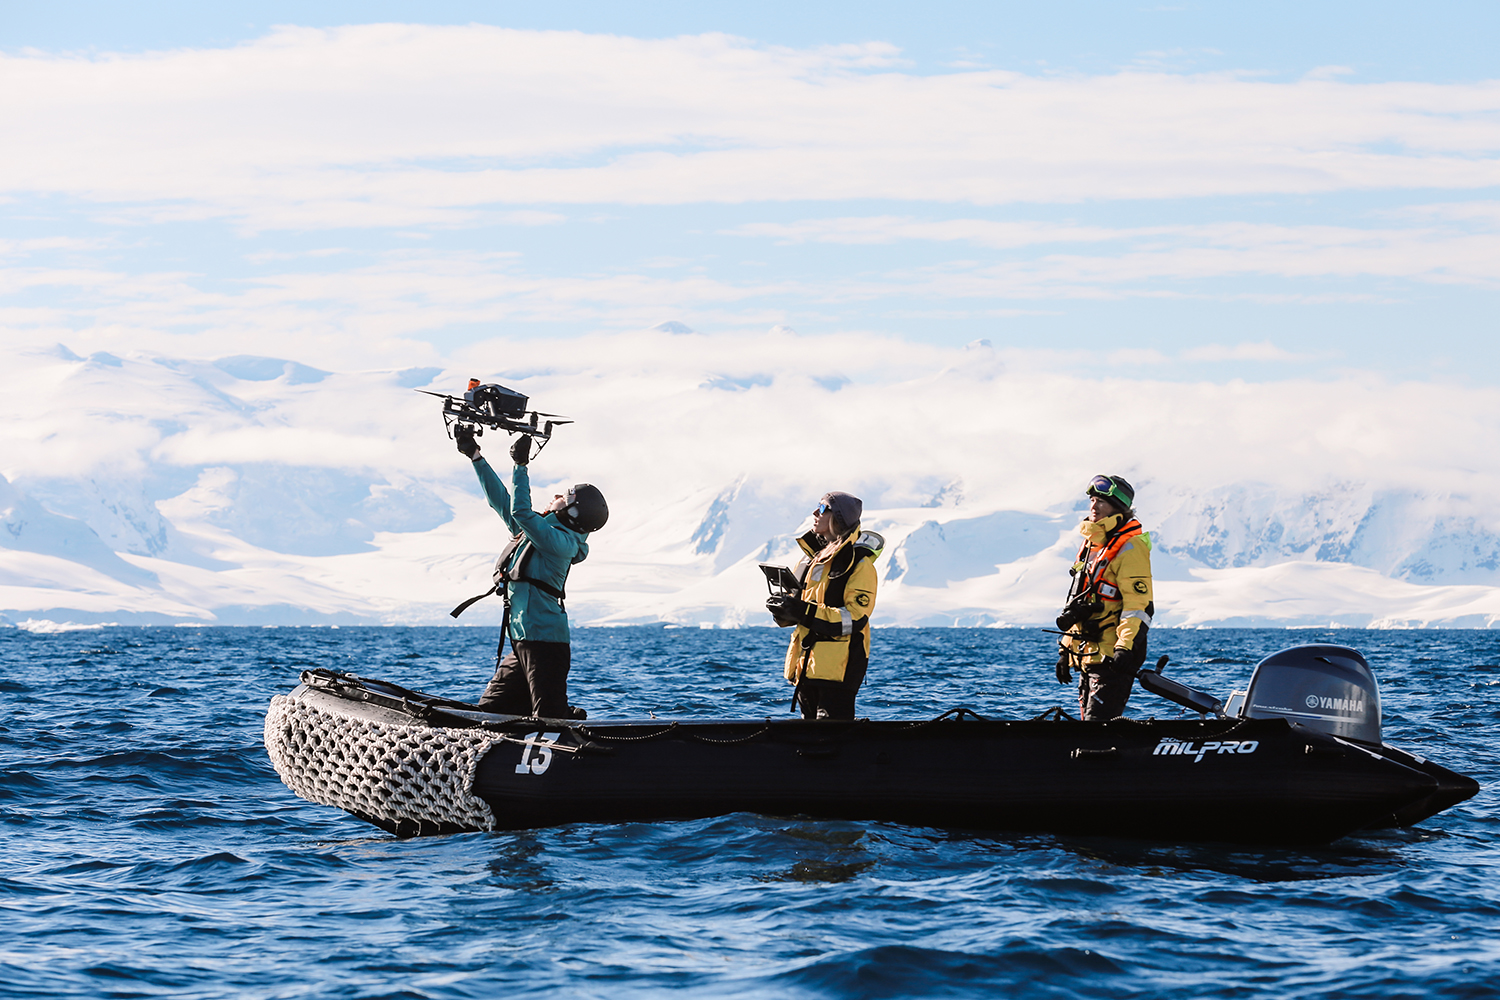 Liah McPherson, Chloe Lew, and Kiirsten Flynn fly a drone in Antarctica